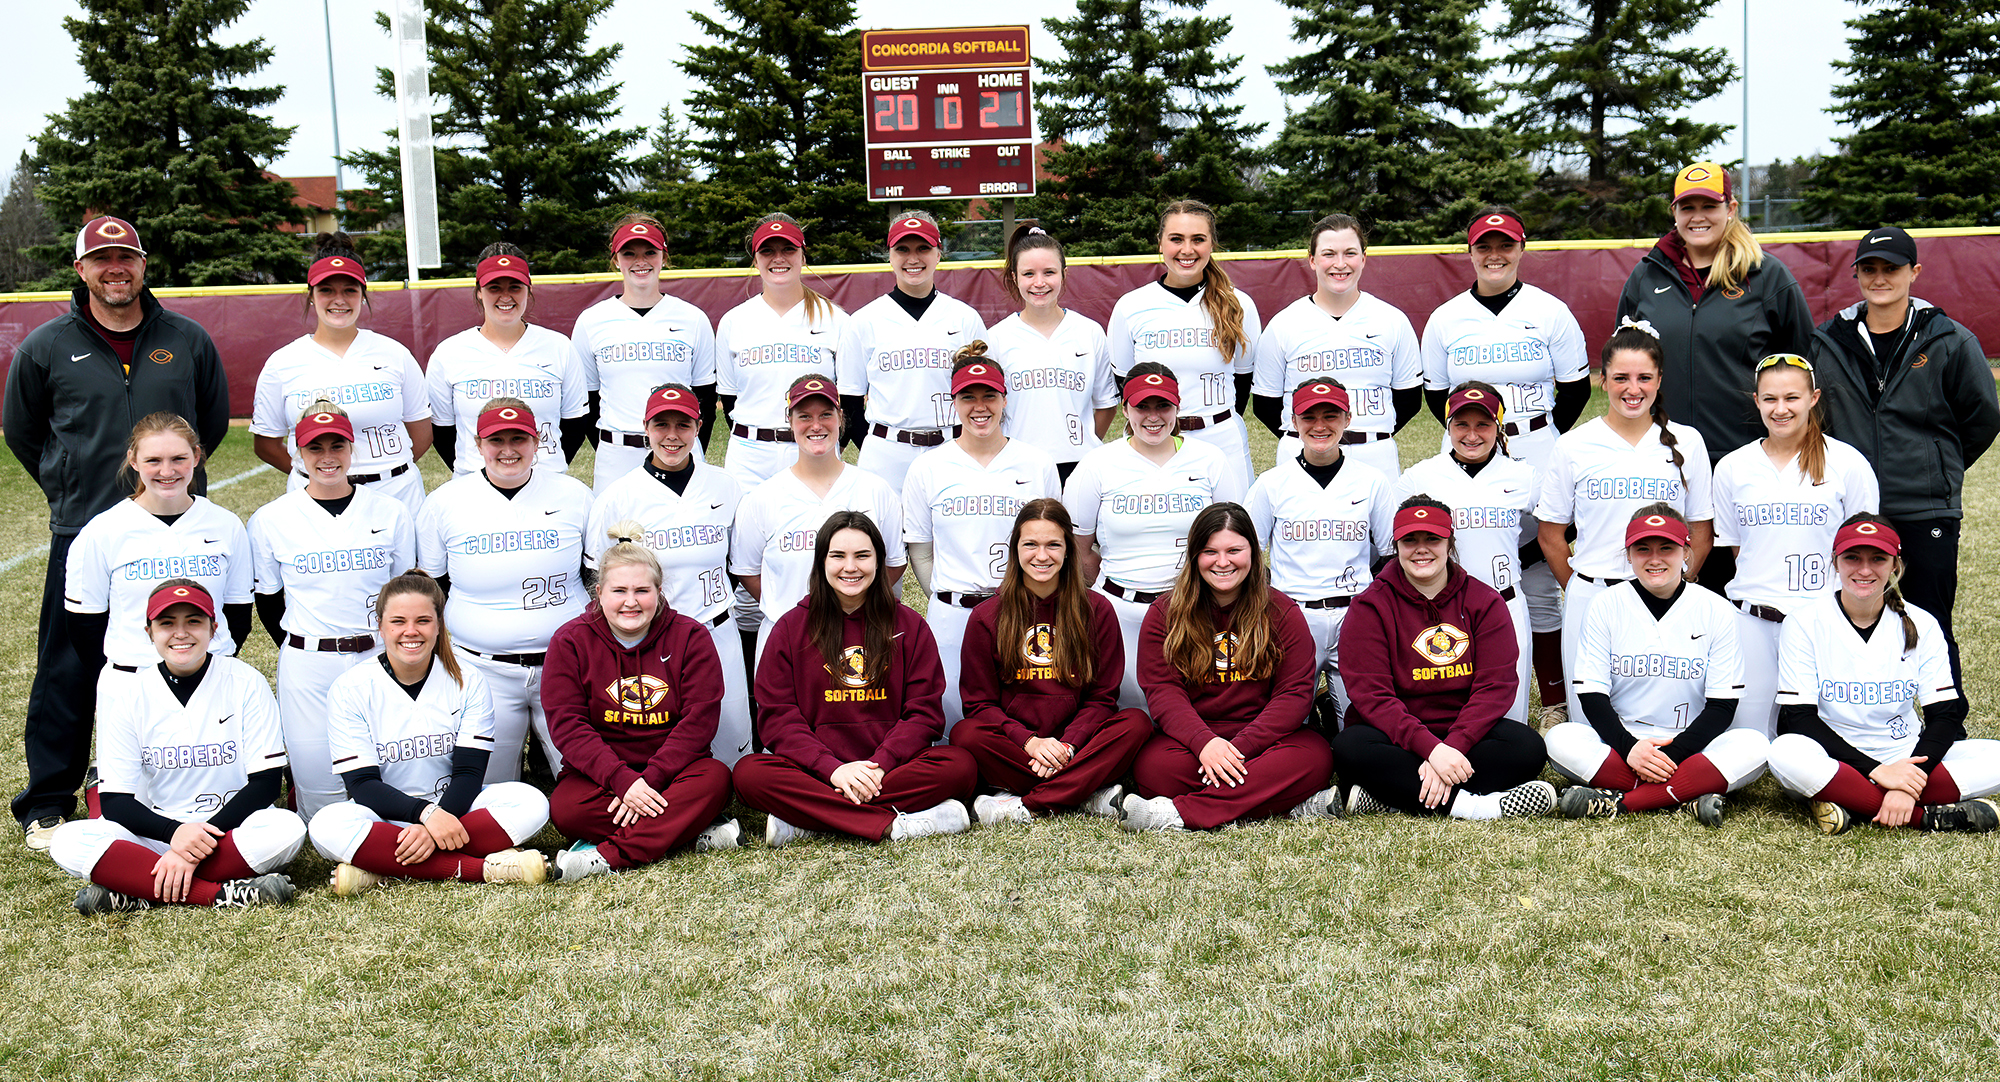 Concordia beat Augsburg 4-2 in Game 1 of their DH to clinch the first-ever playoff berth in program history.